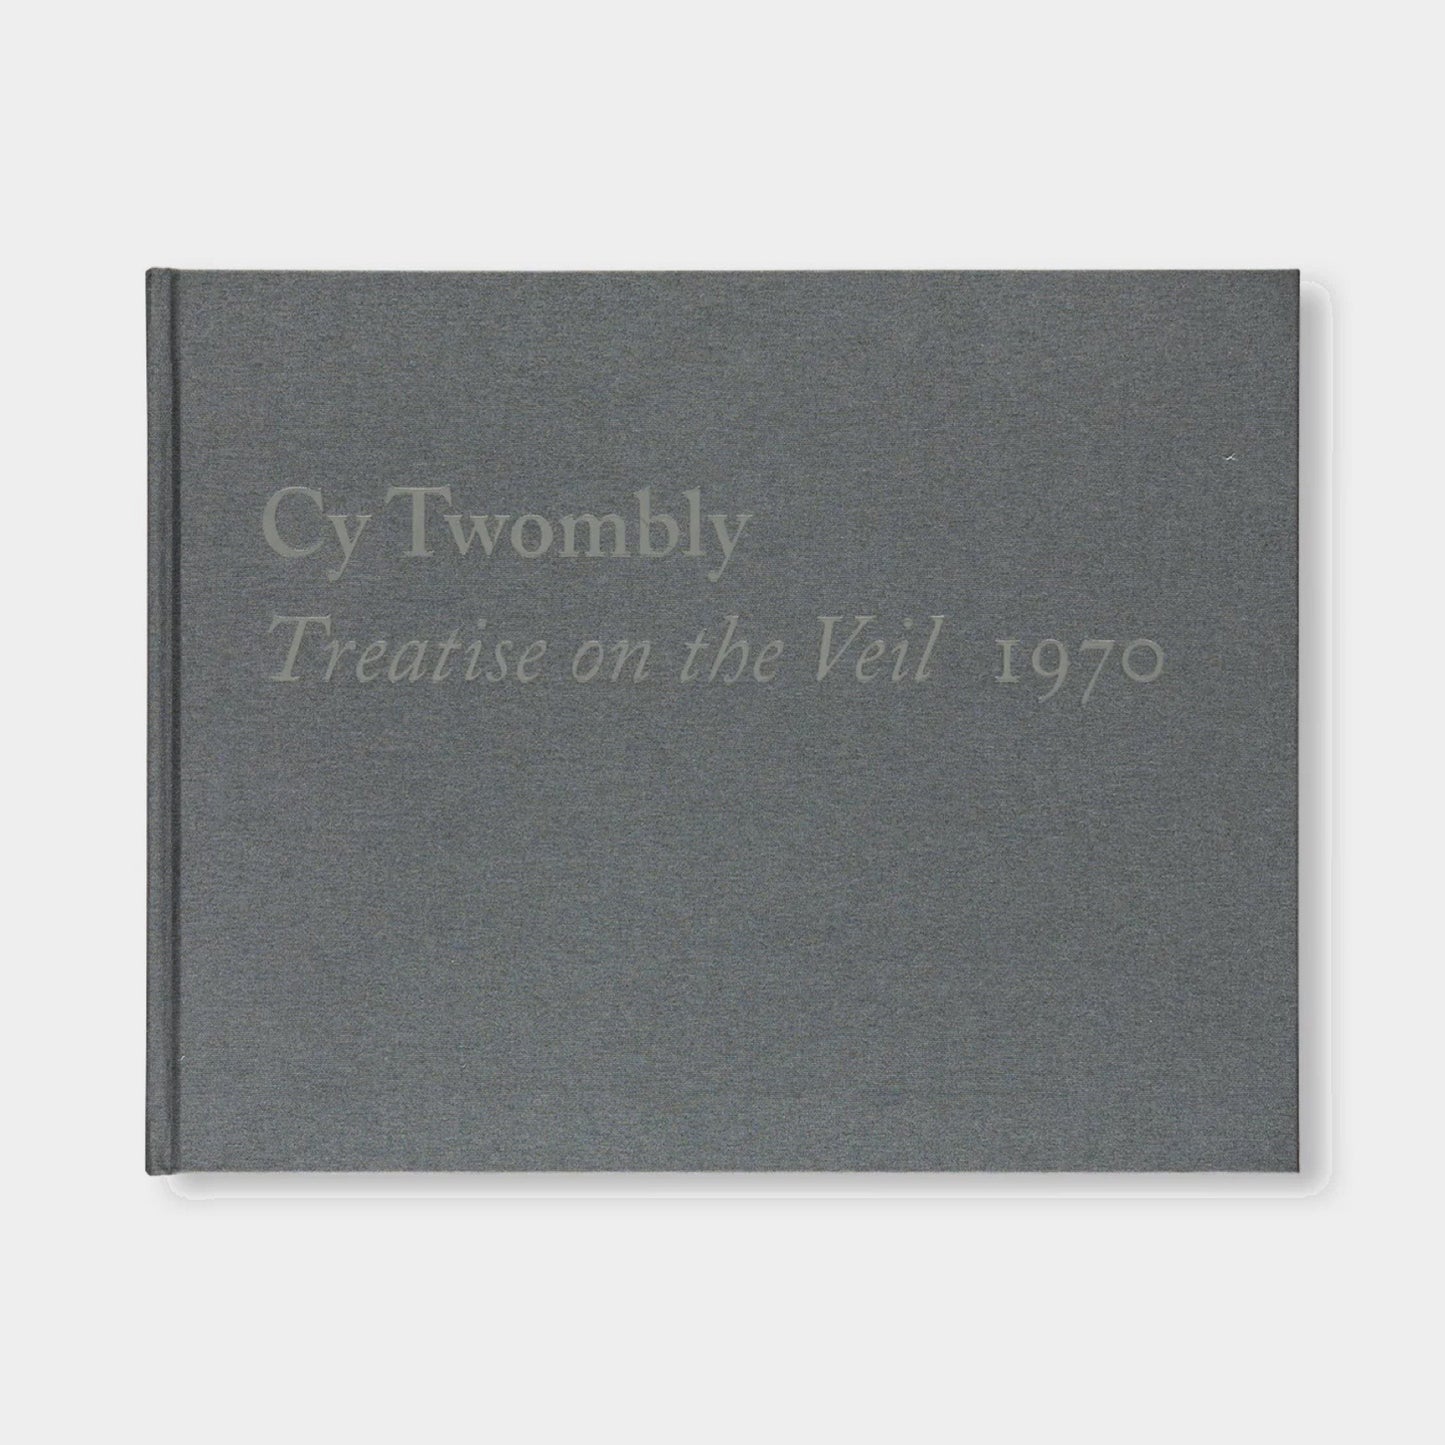 【ART BOOK】TREATISE ON THE VEIL, 1970 by Cy Twombly